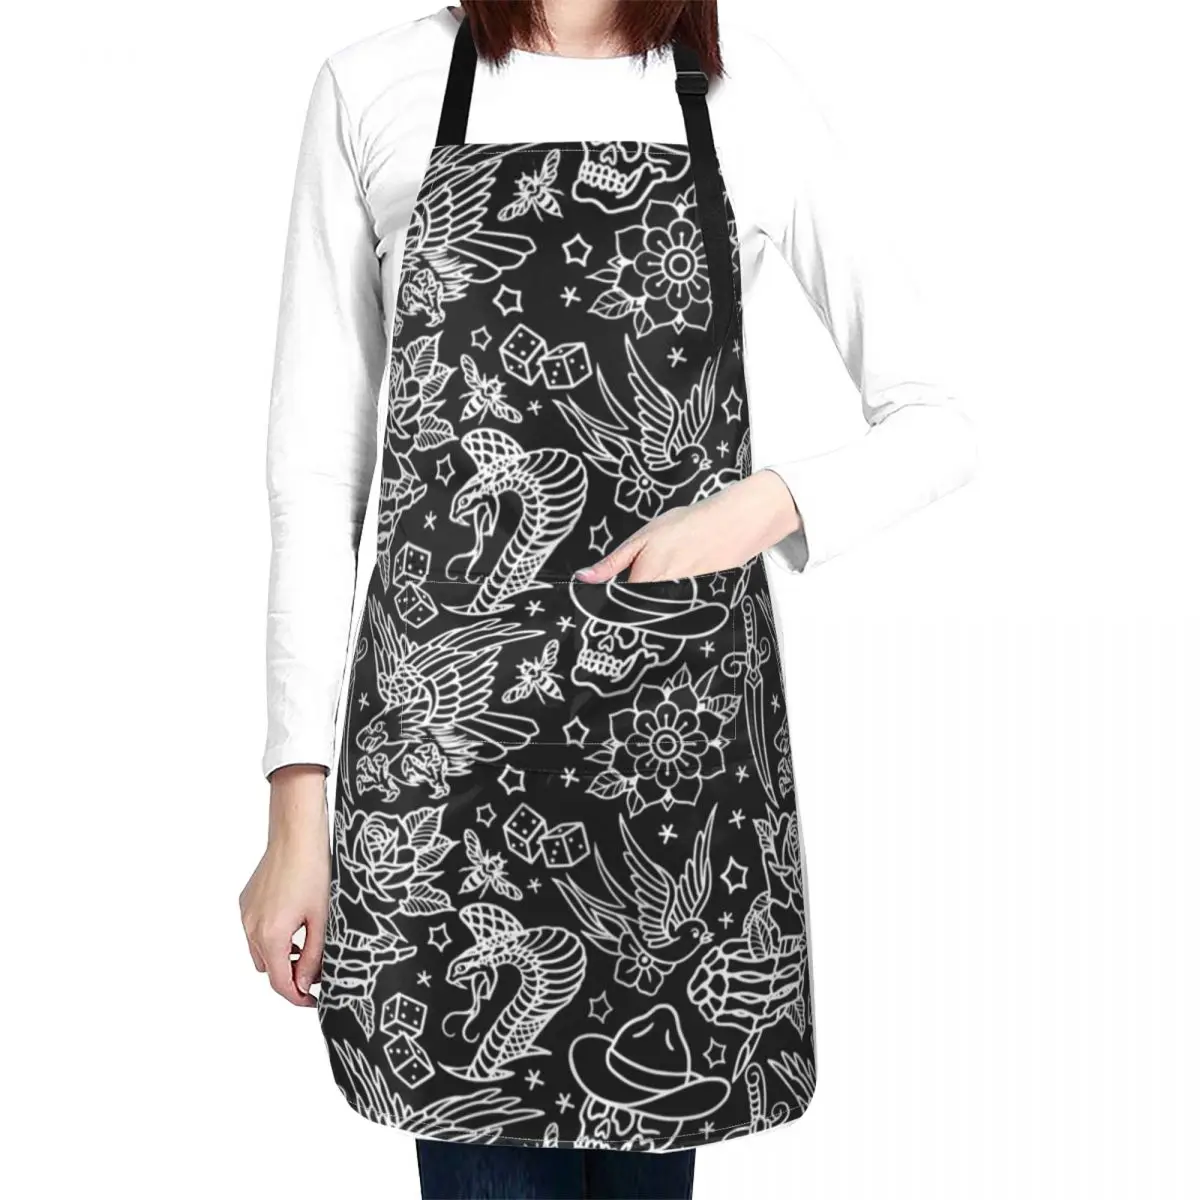 

American Traditional Tattoo Flash Print Apron Beauty Apron Utensils For Kitchen men's barbecue apron cleaning aprons